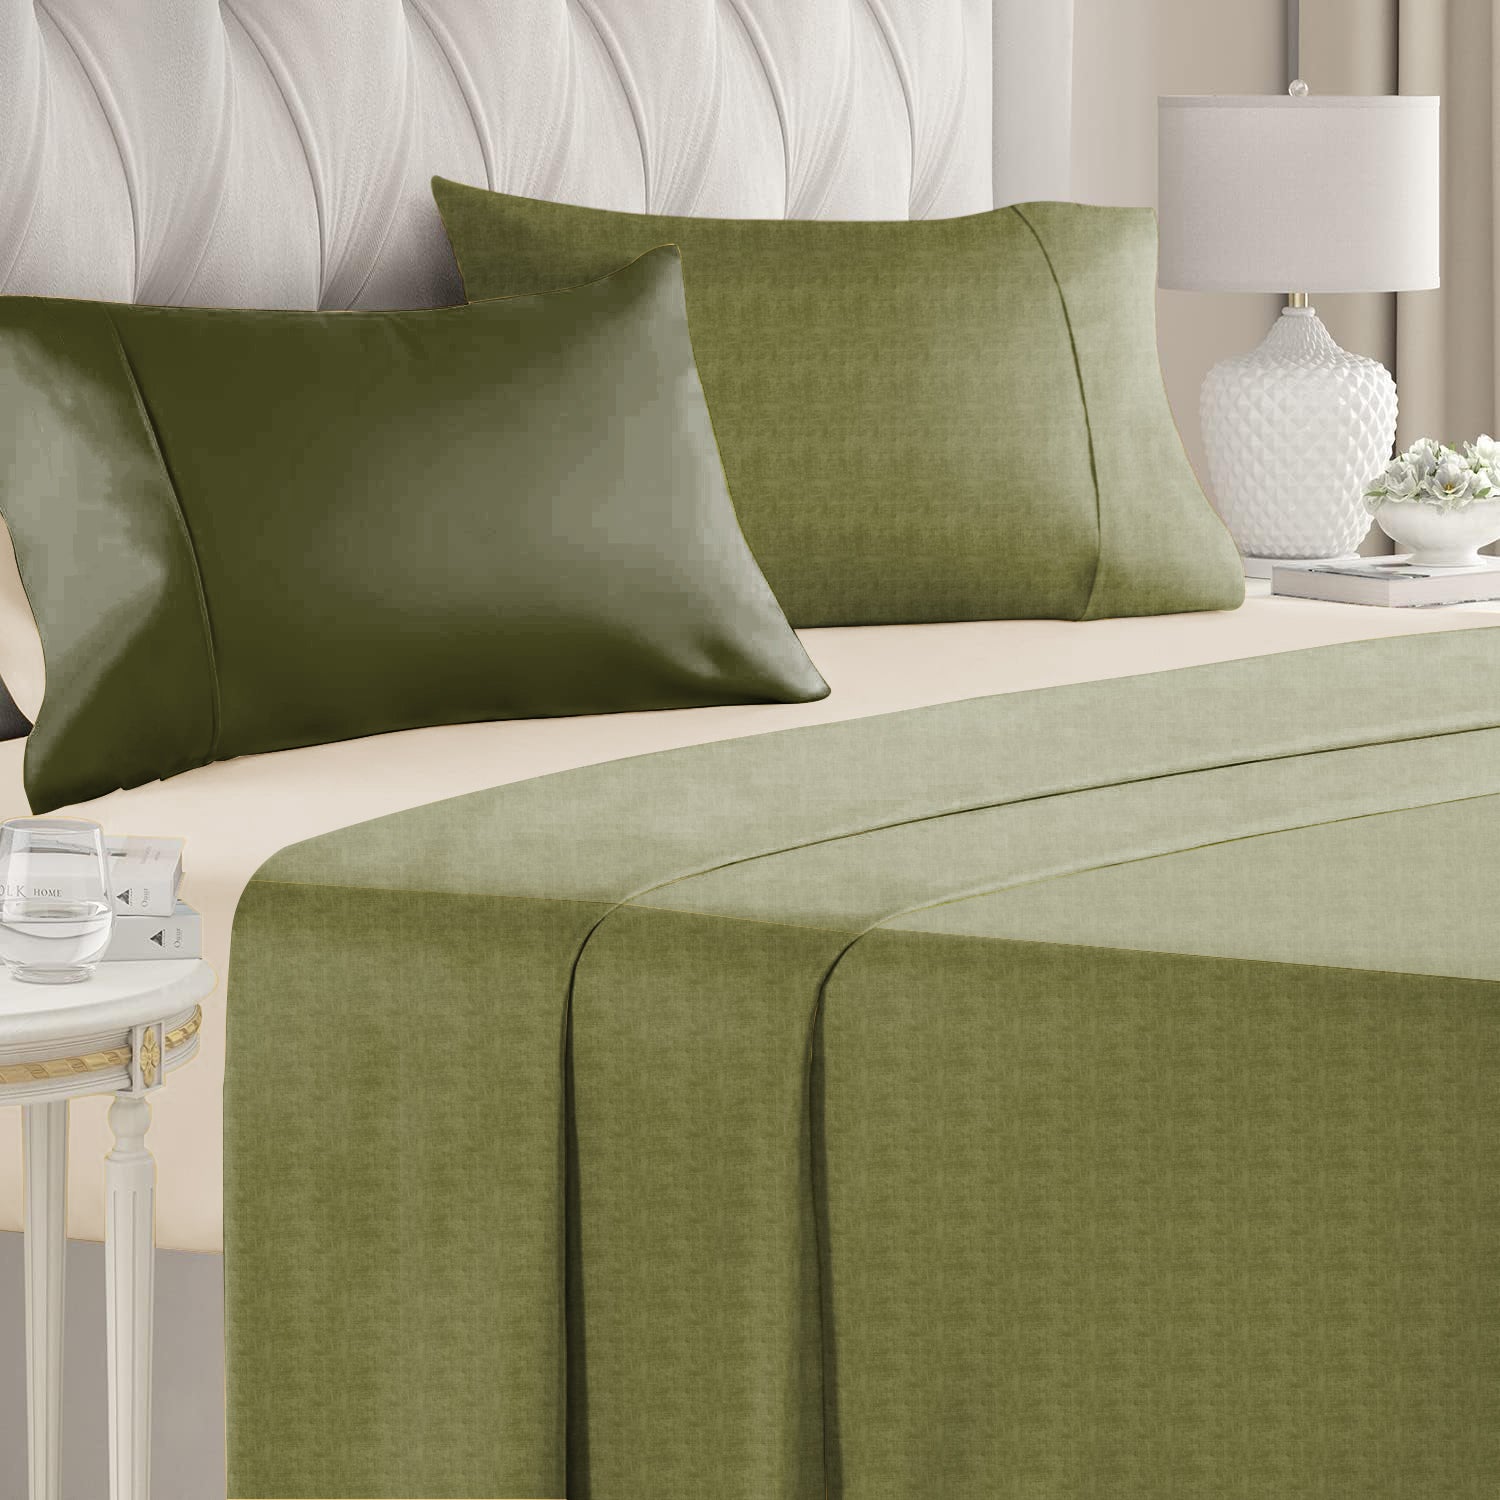 Jodhpur Texture Bedsheet for Double Bed with 2 PillowCovers King Size (104" X 90") Olive